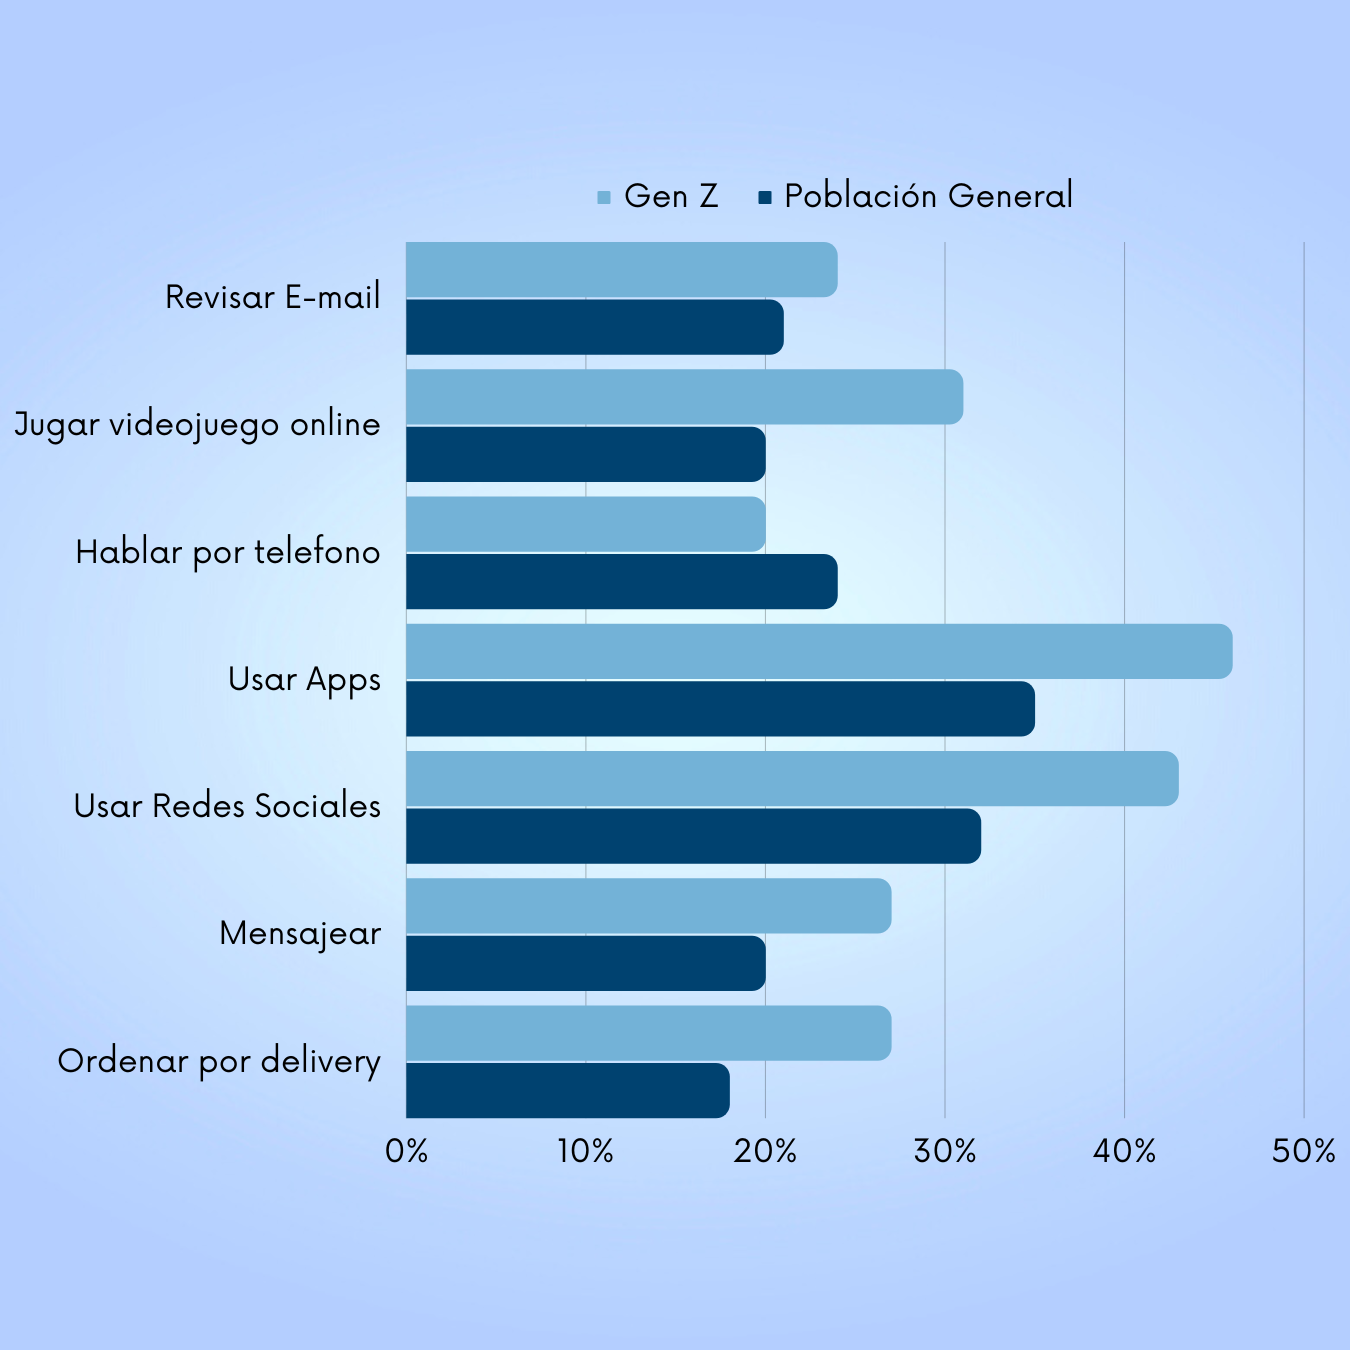 Checkwrite emails Play games online Talk to someone on the phone Use apps Use social media platforms TextSMS message Order food delivery Source Nielsen Fan Insights, August 202